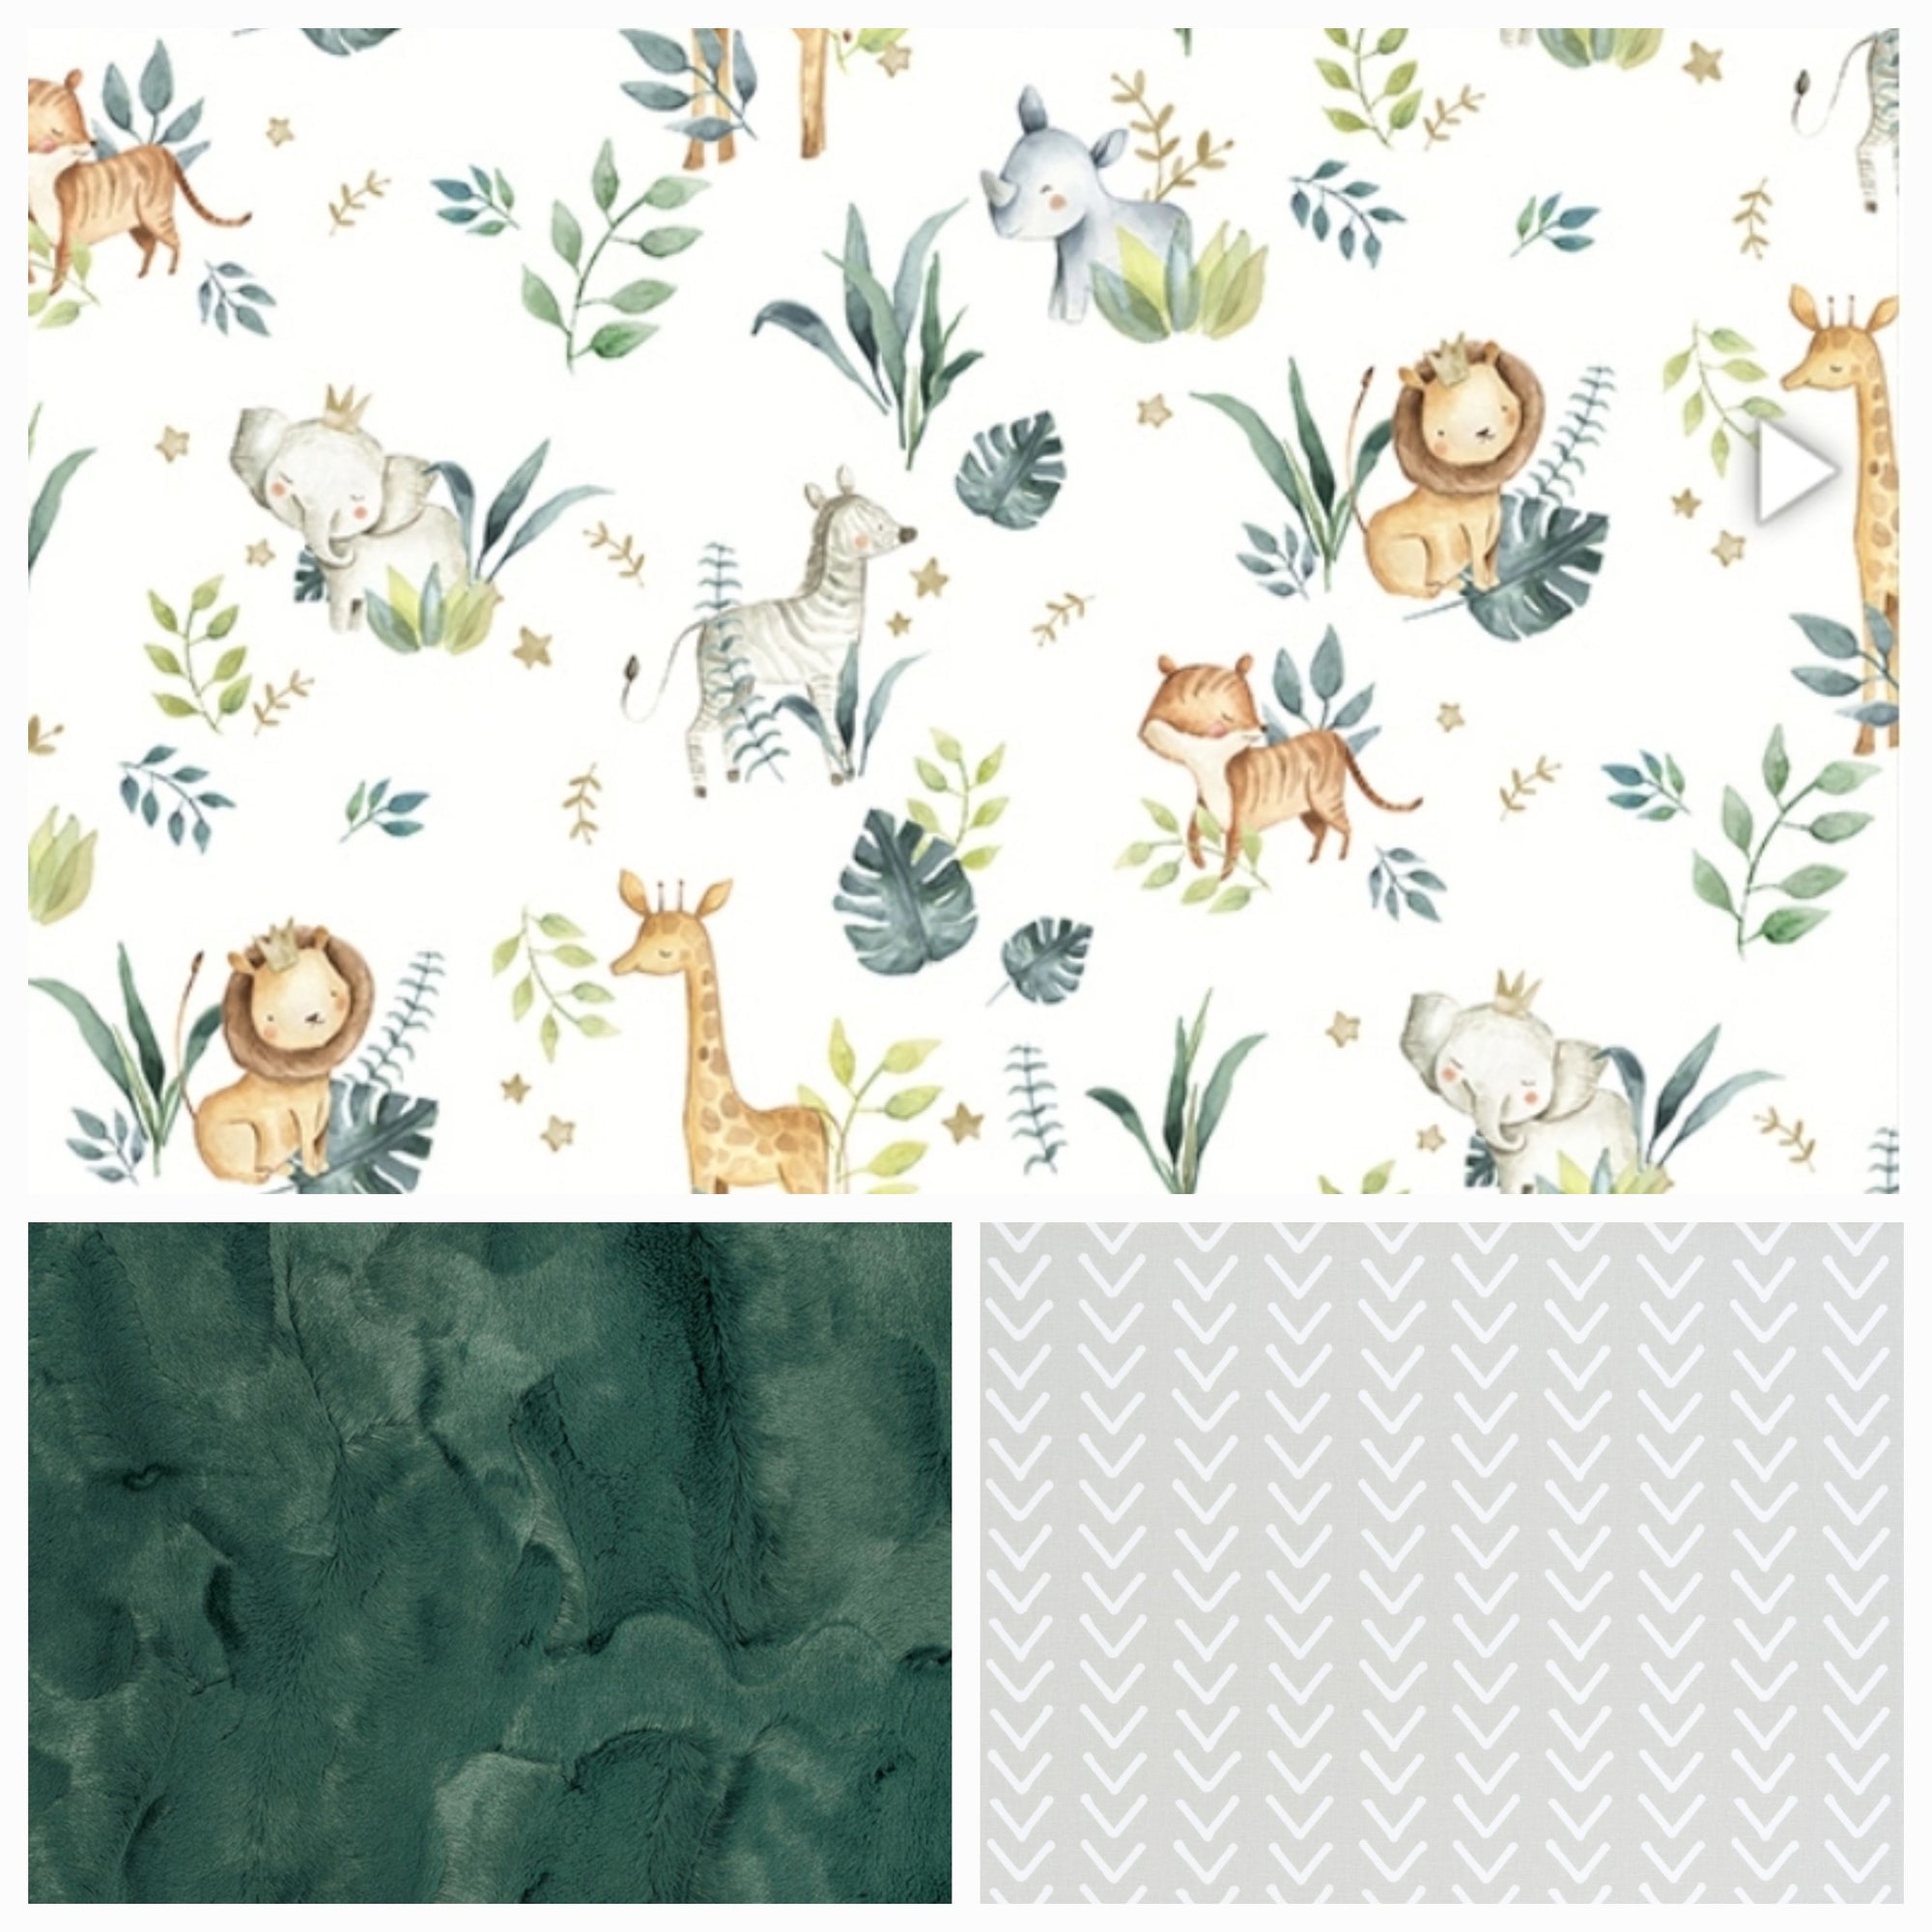 New Release Neutral Crib Bedding- Baby Jungle Safari Crib Bedding Collection - DBC Baby Bedding Co 